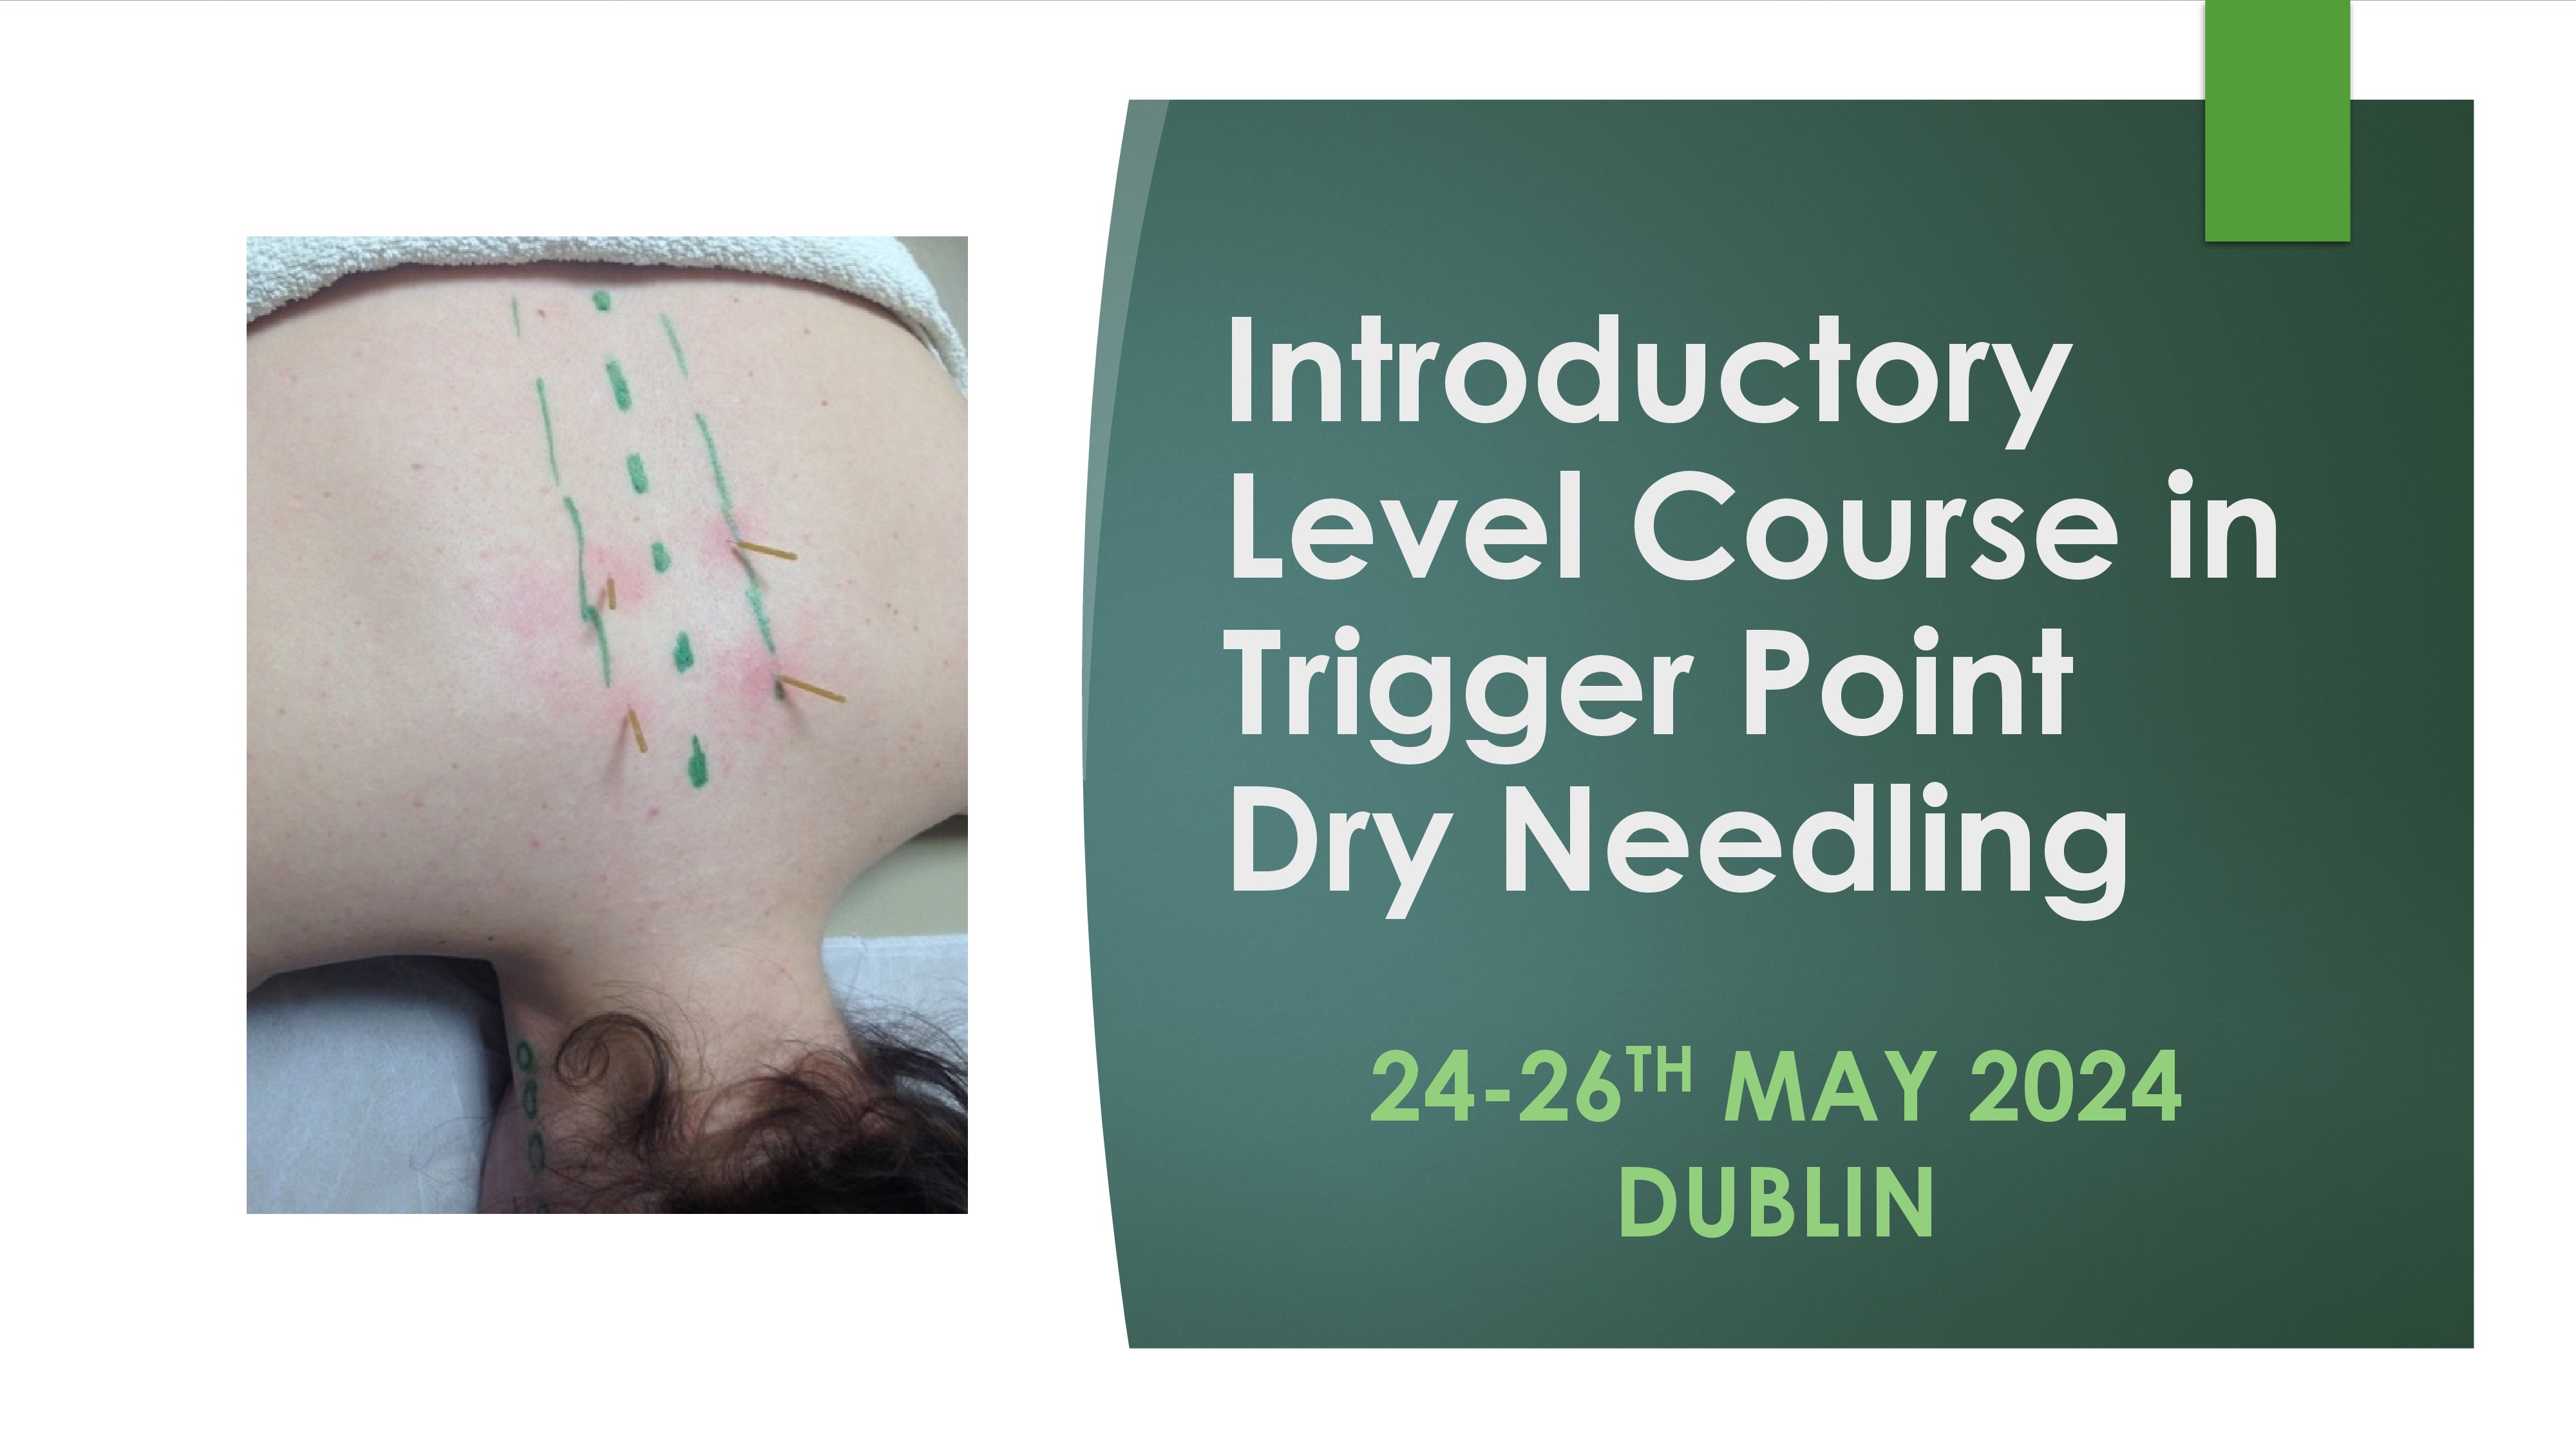 Introductory Level Trigger Point Dry Needling Course 24-26th May 2024, DUBLIN